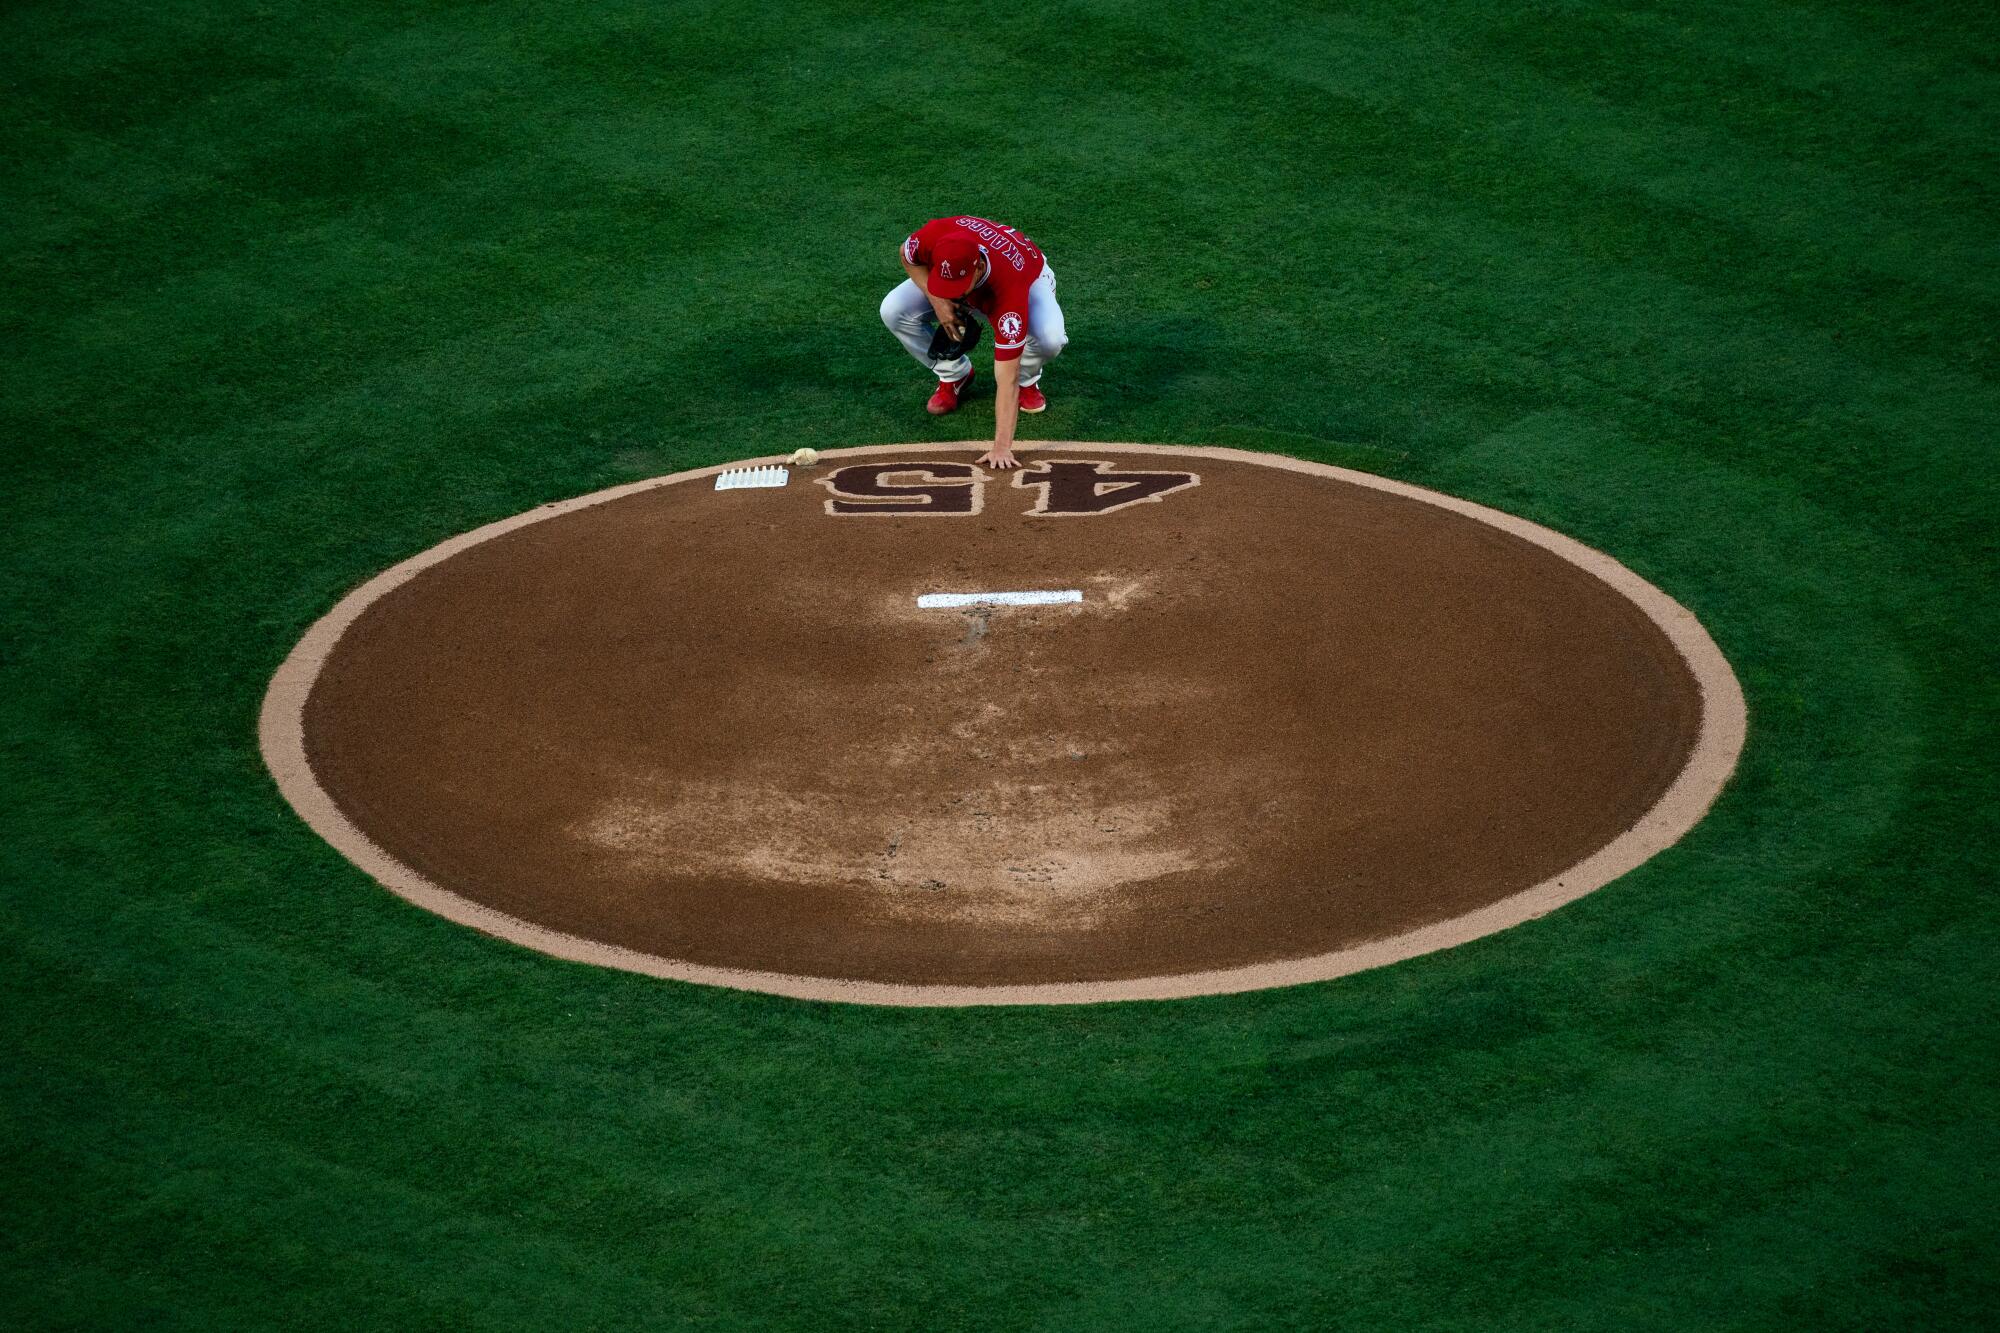 Los Angeles Angels starting pitcher Taylor Cole (67) places his hand on the No. 45 on the pitchers mound.